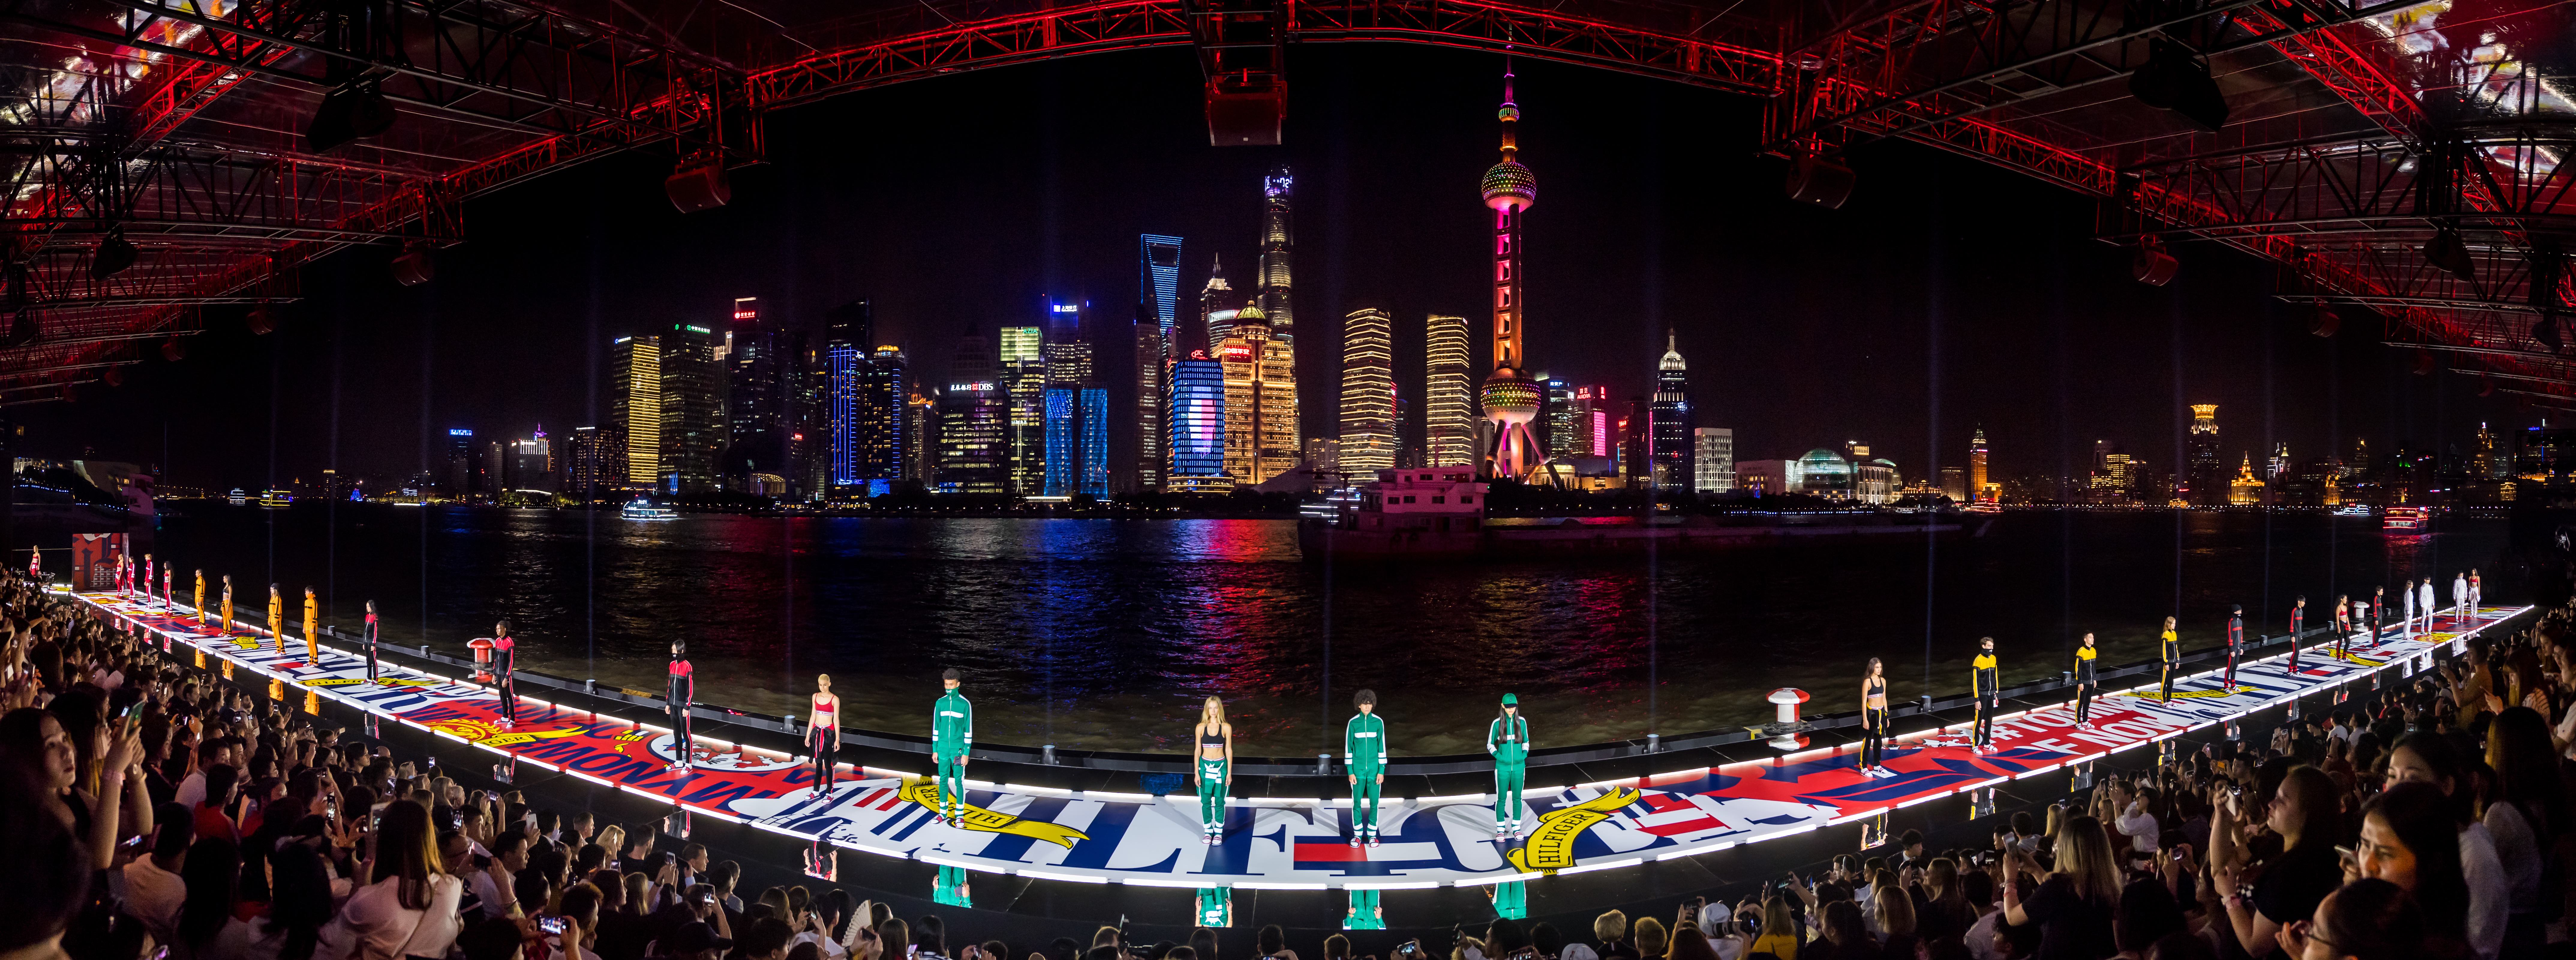 Tommy Hilfiger &#038; Lewis Hamilton Debut Fall 2018 Collection On Shanghai Waterfront